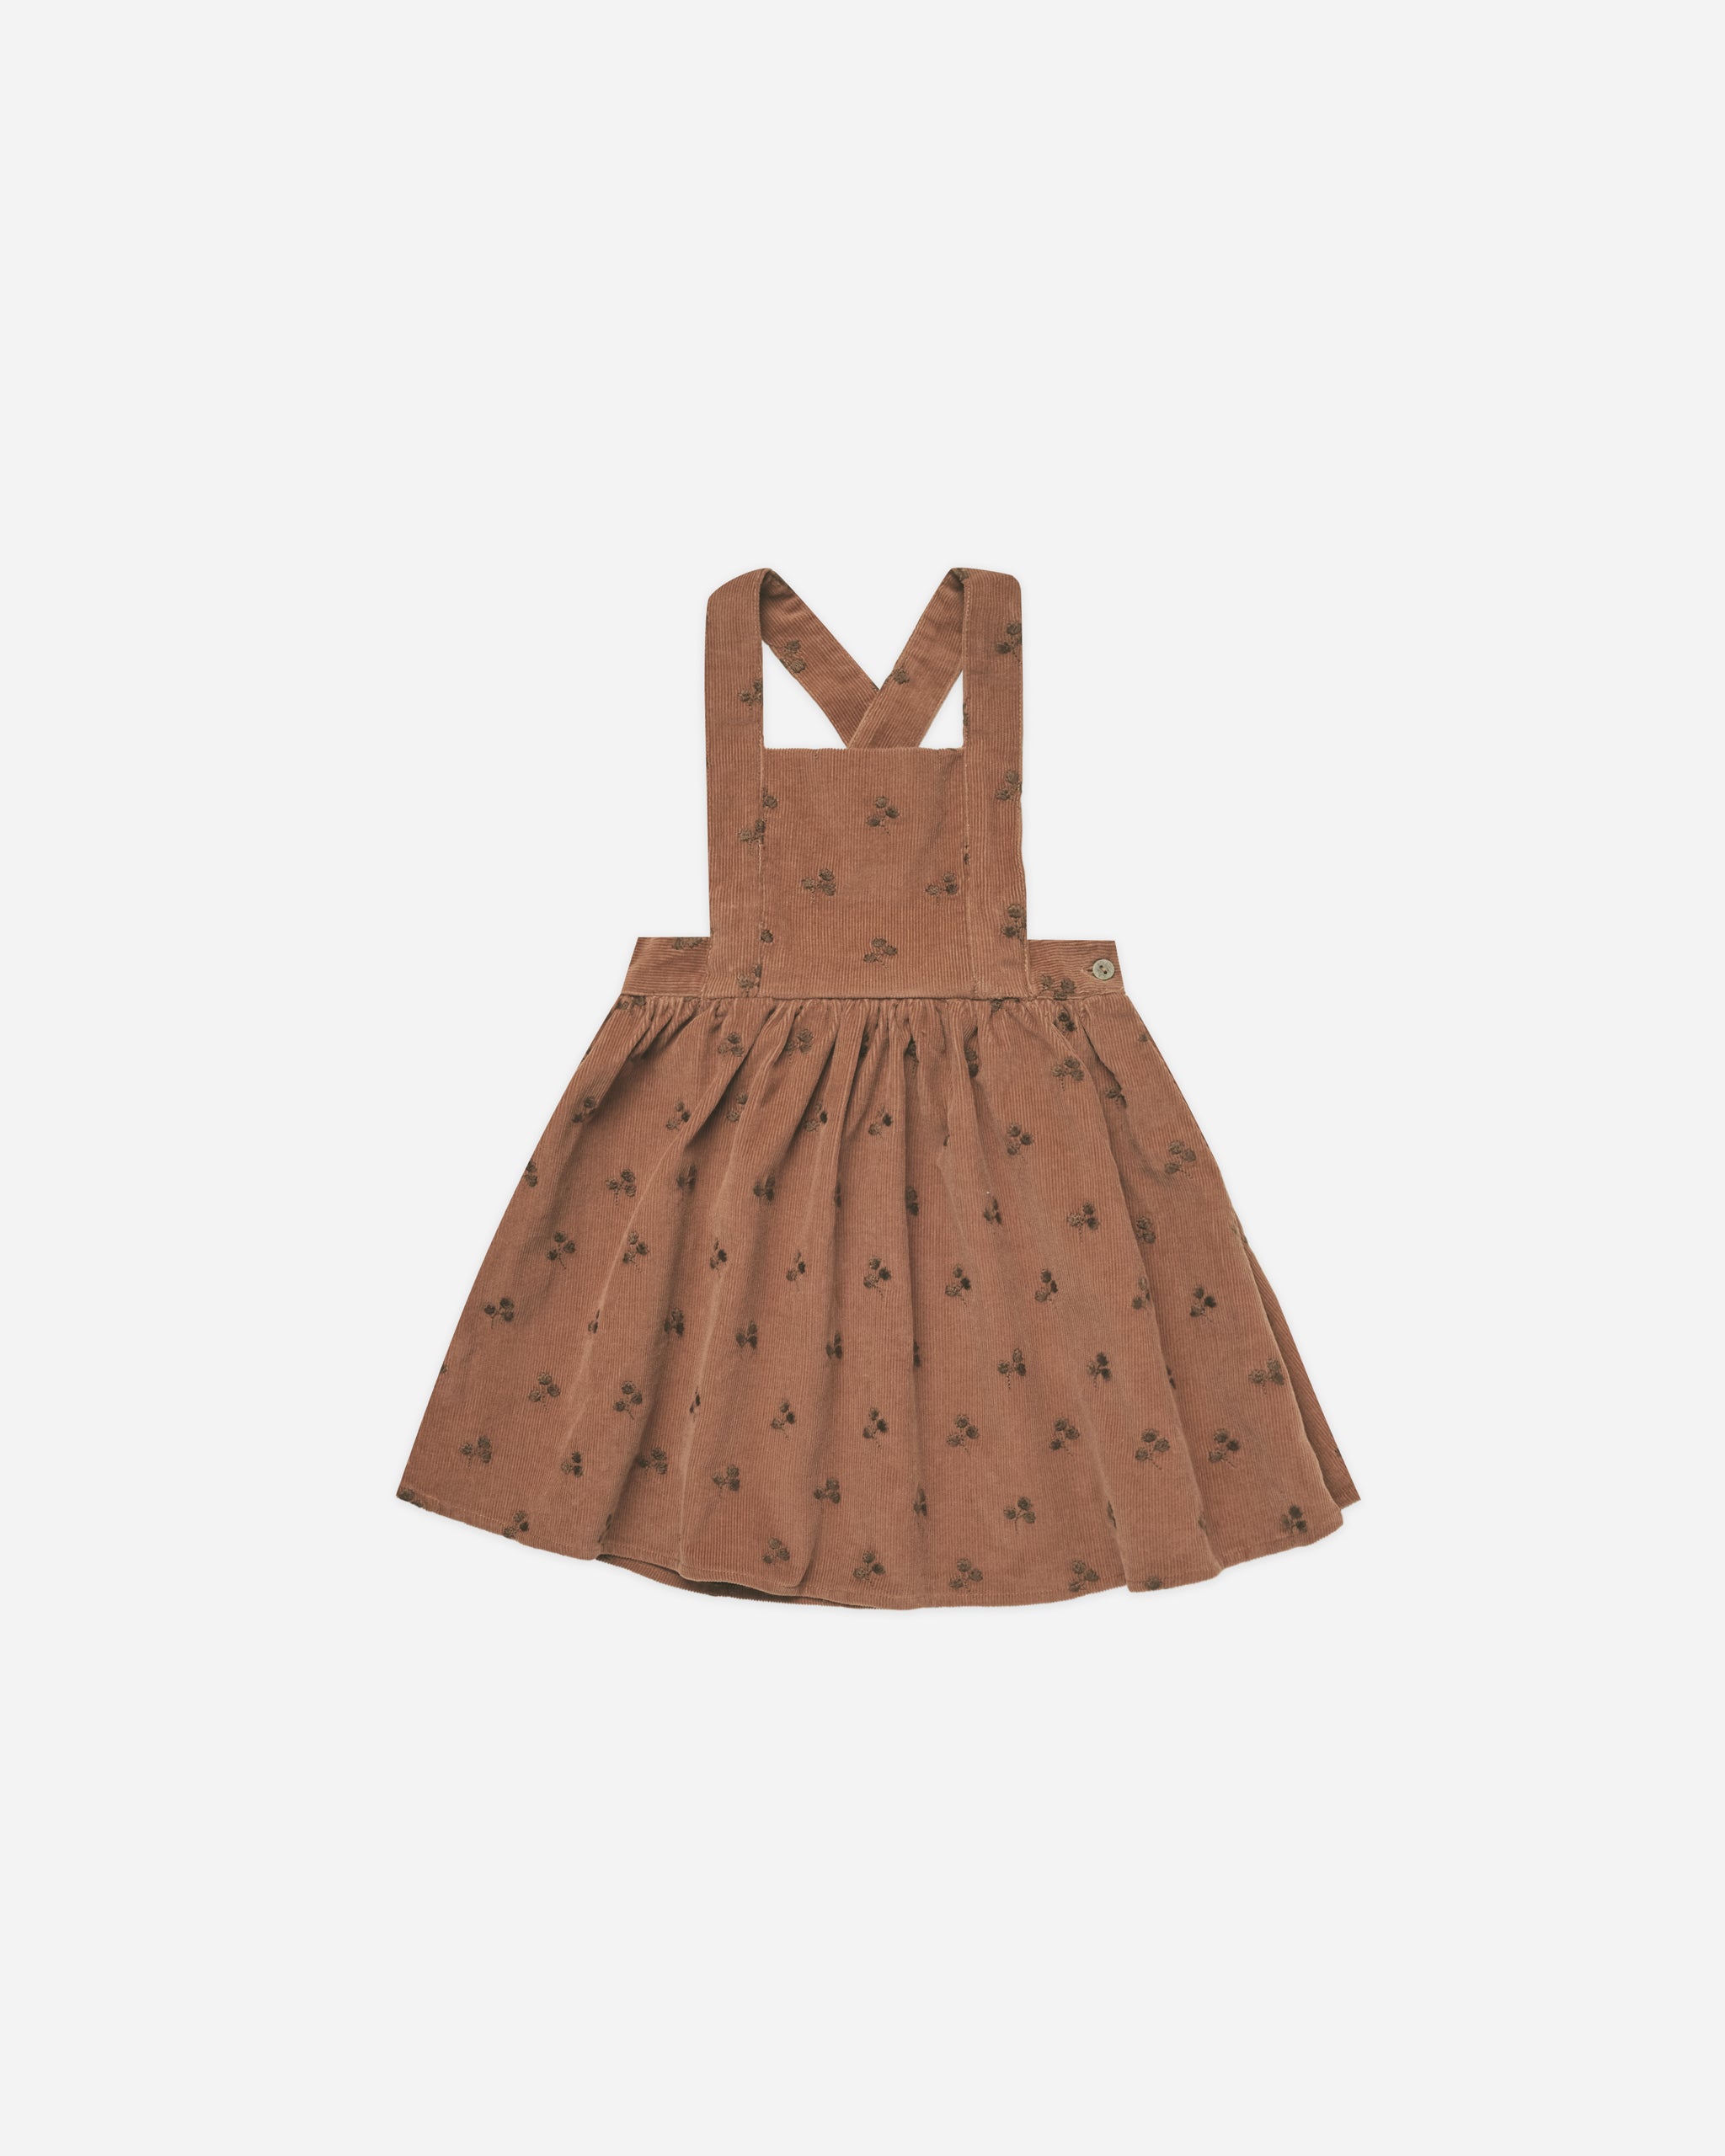 Corduroy Pinafore Dress || Blossom Embroidery - Rylee + Cru | Kids Clothes | Trendy Baby Clothes | Modern Infant Outfits |